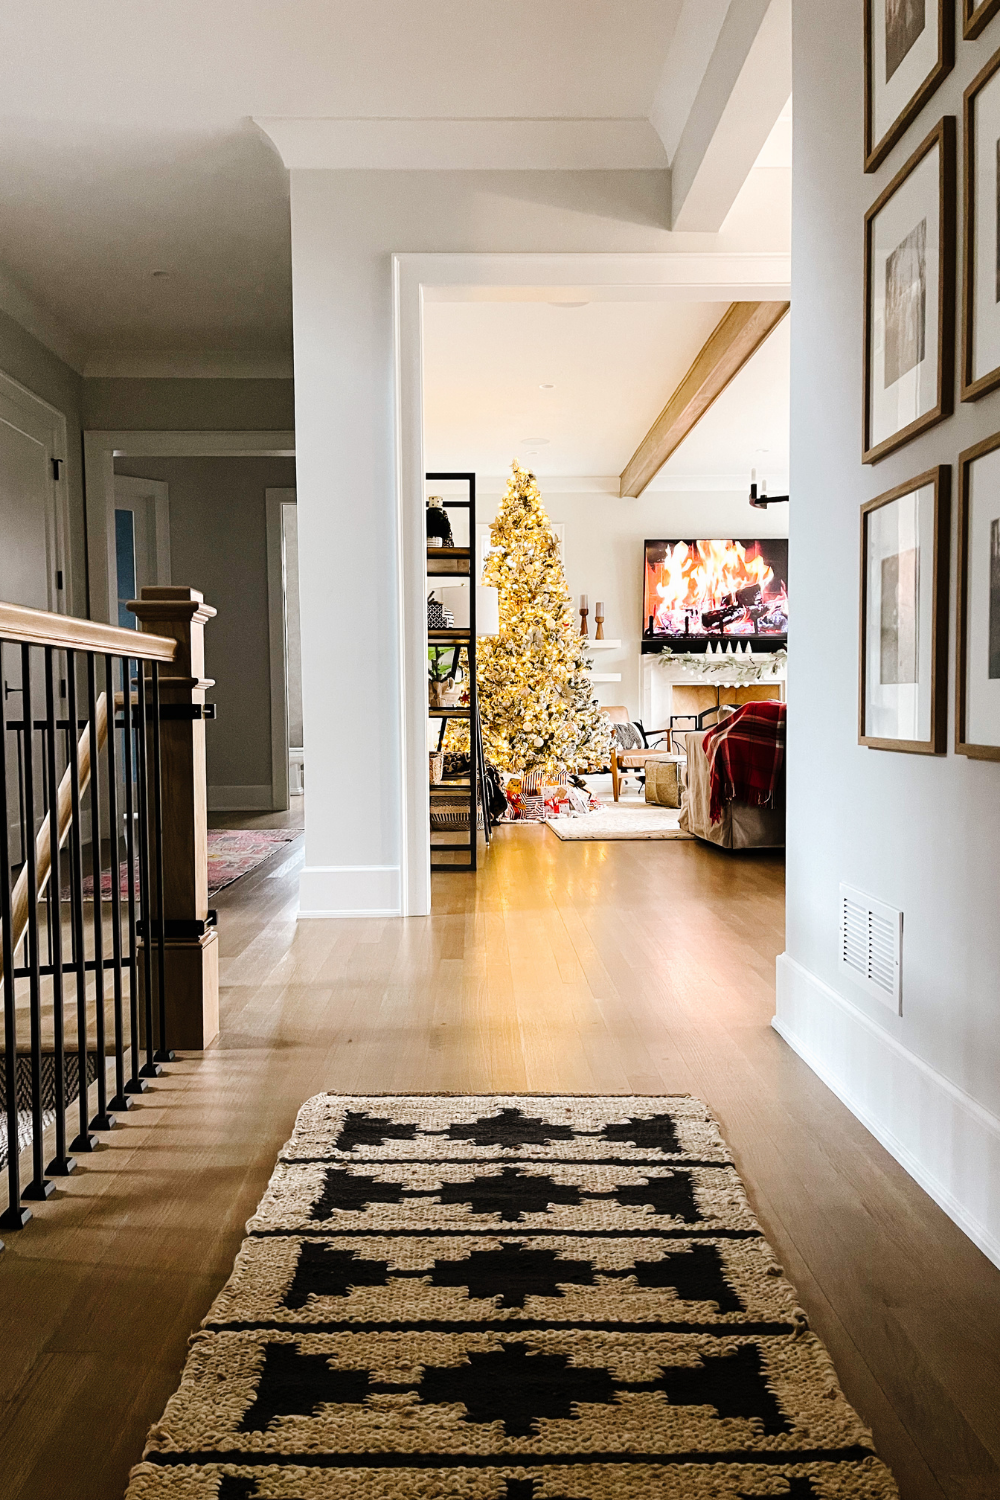 Entryway leading to the family room with a flocked Chrismas tree